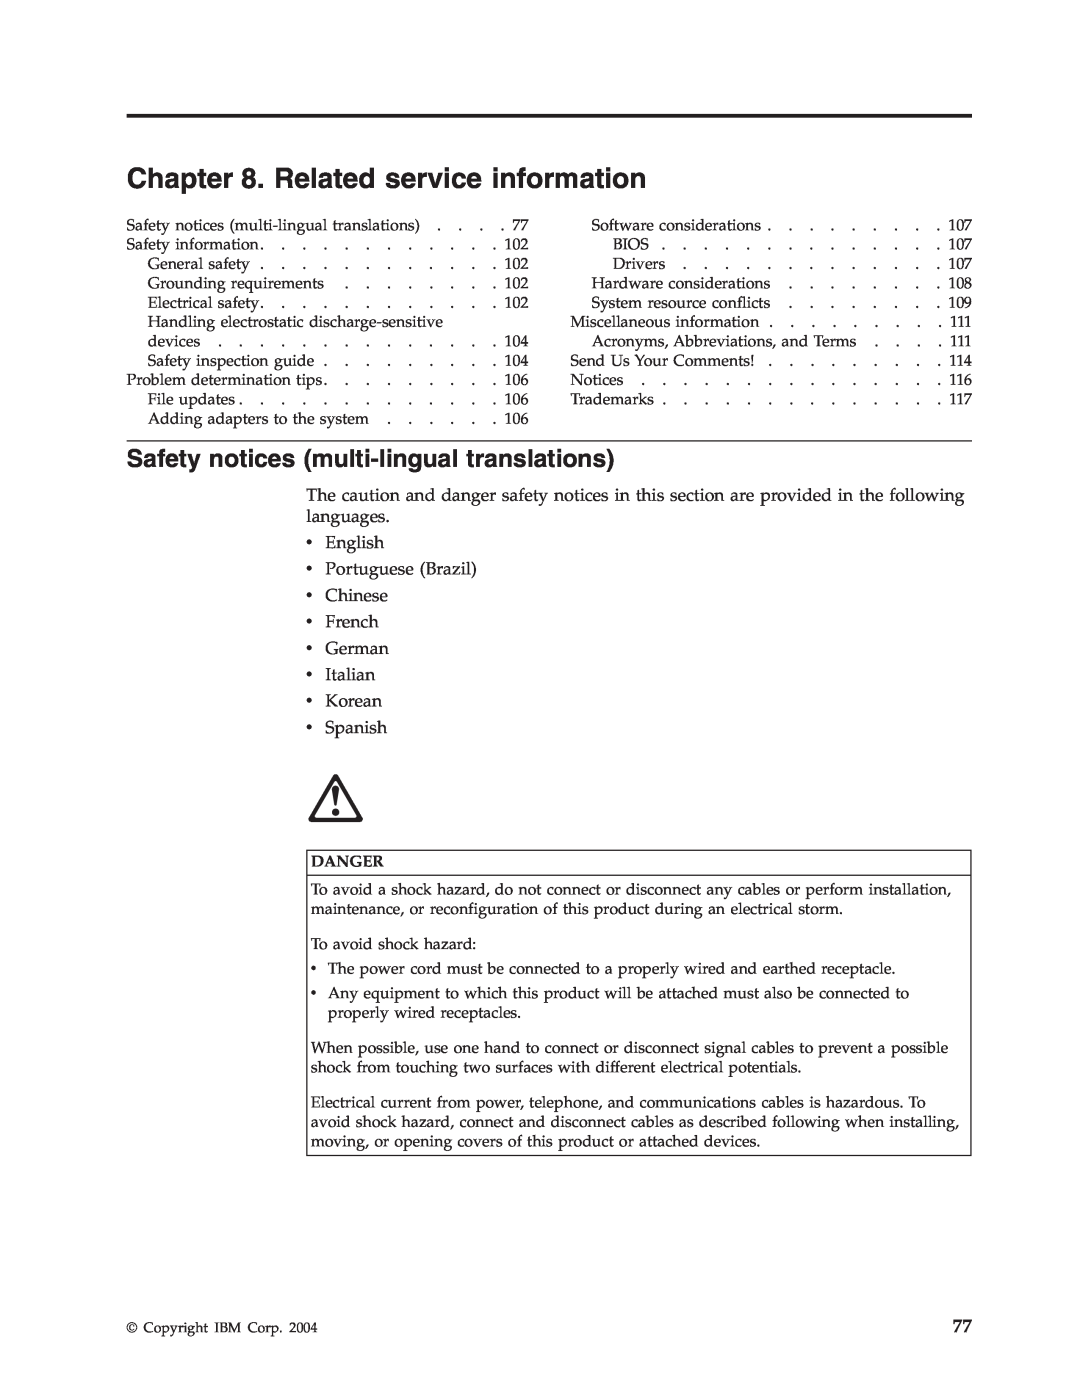 IBM 2179, 6643 manual Related service information, Safety notices multi-lingual translations 